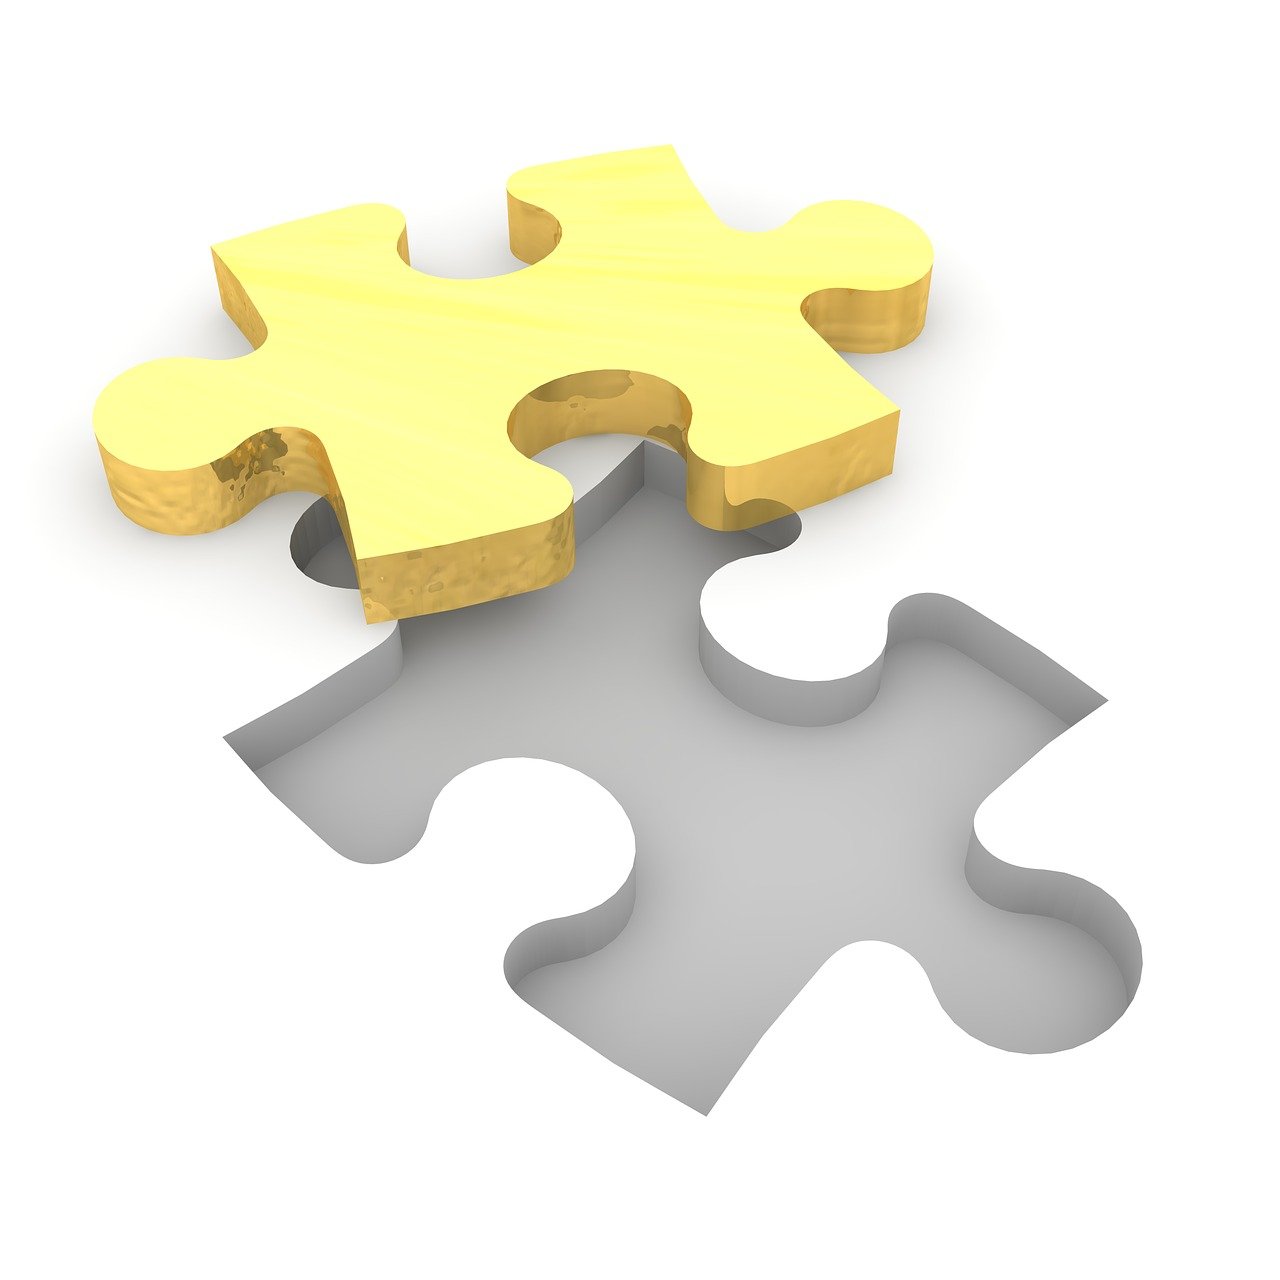 a couple of puzzle pieces sitting on top of each other, a jigsaw puzzle, by Harold Elliott, silver and yellow color scheme, solidworks, biroremediation, has gold